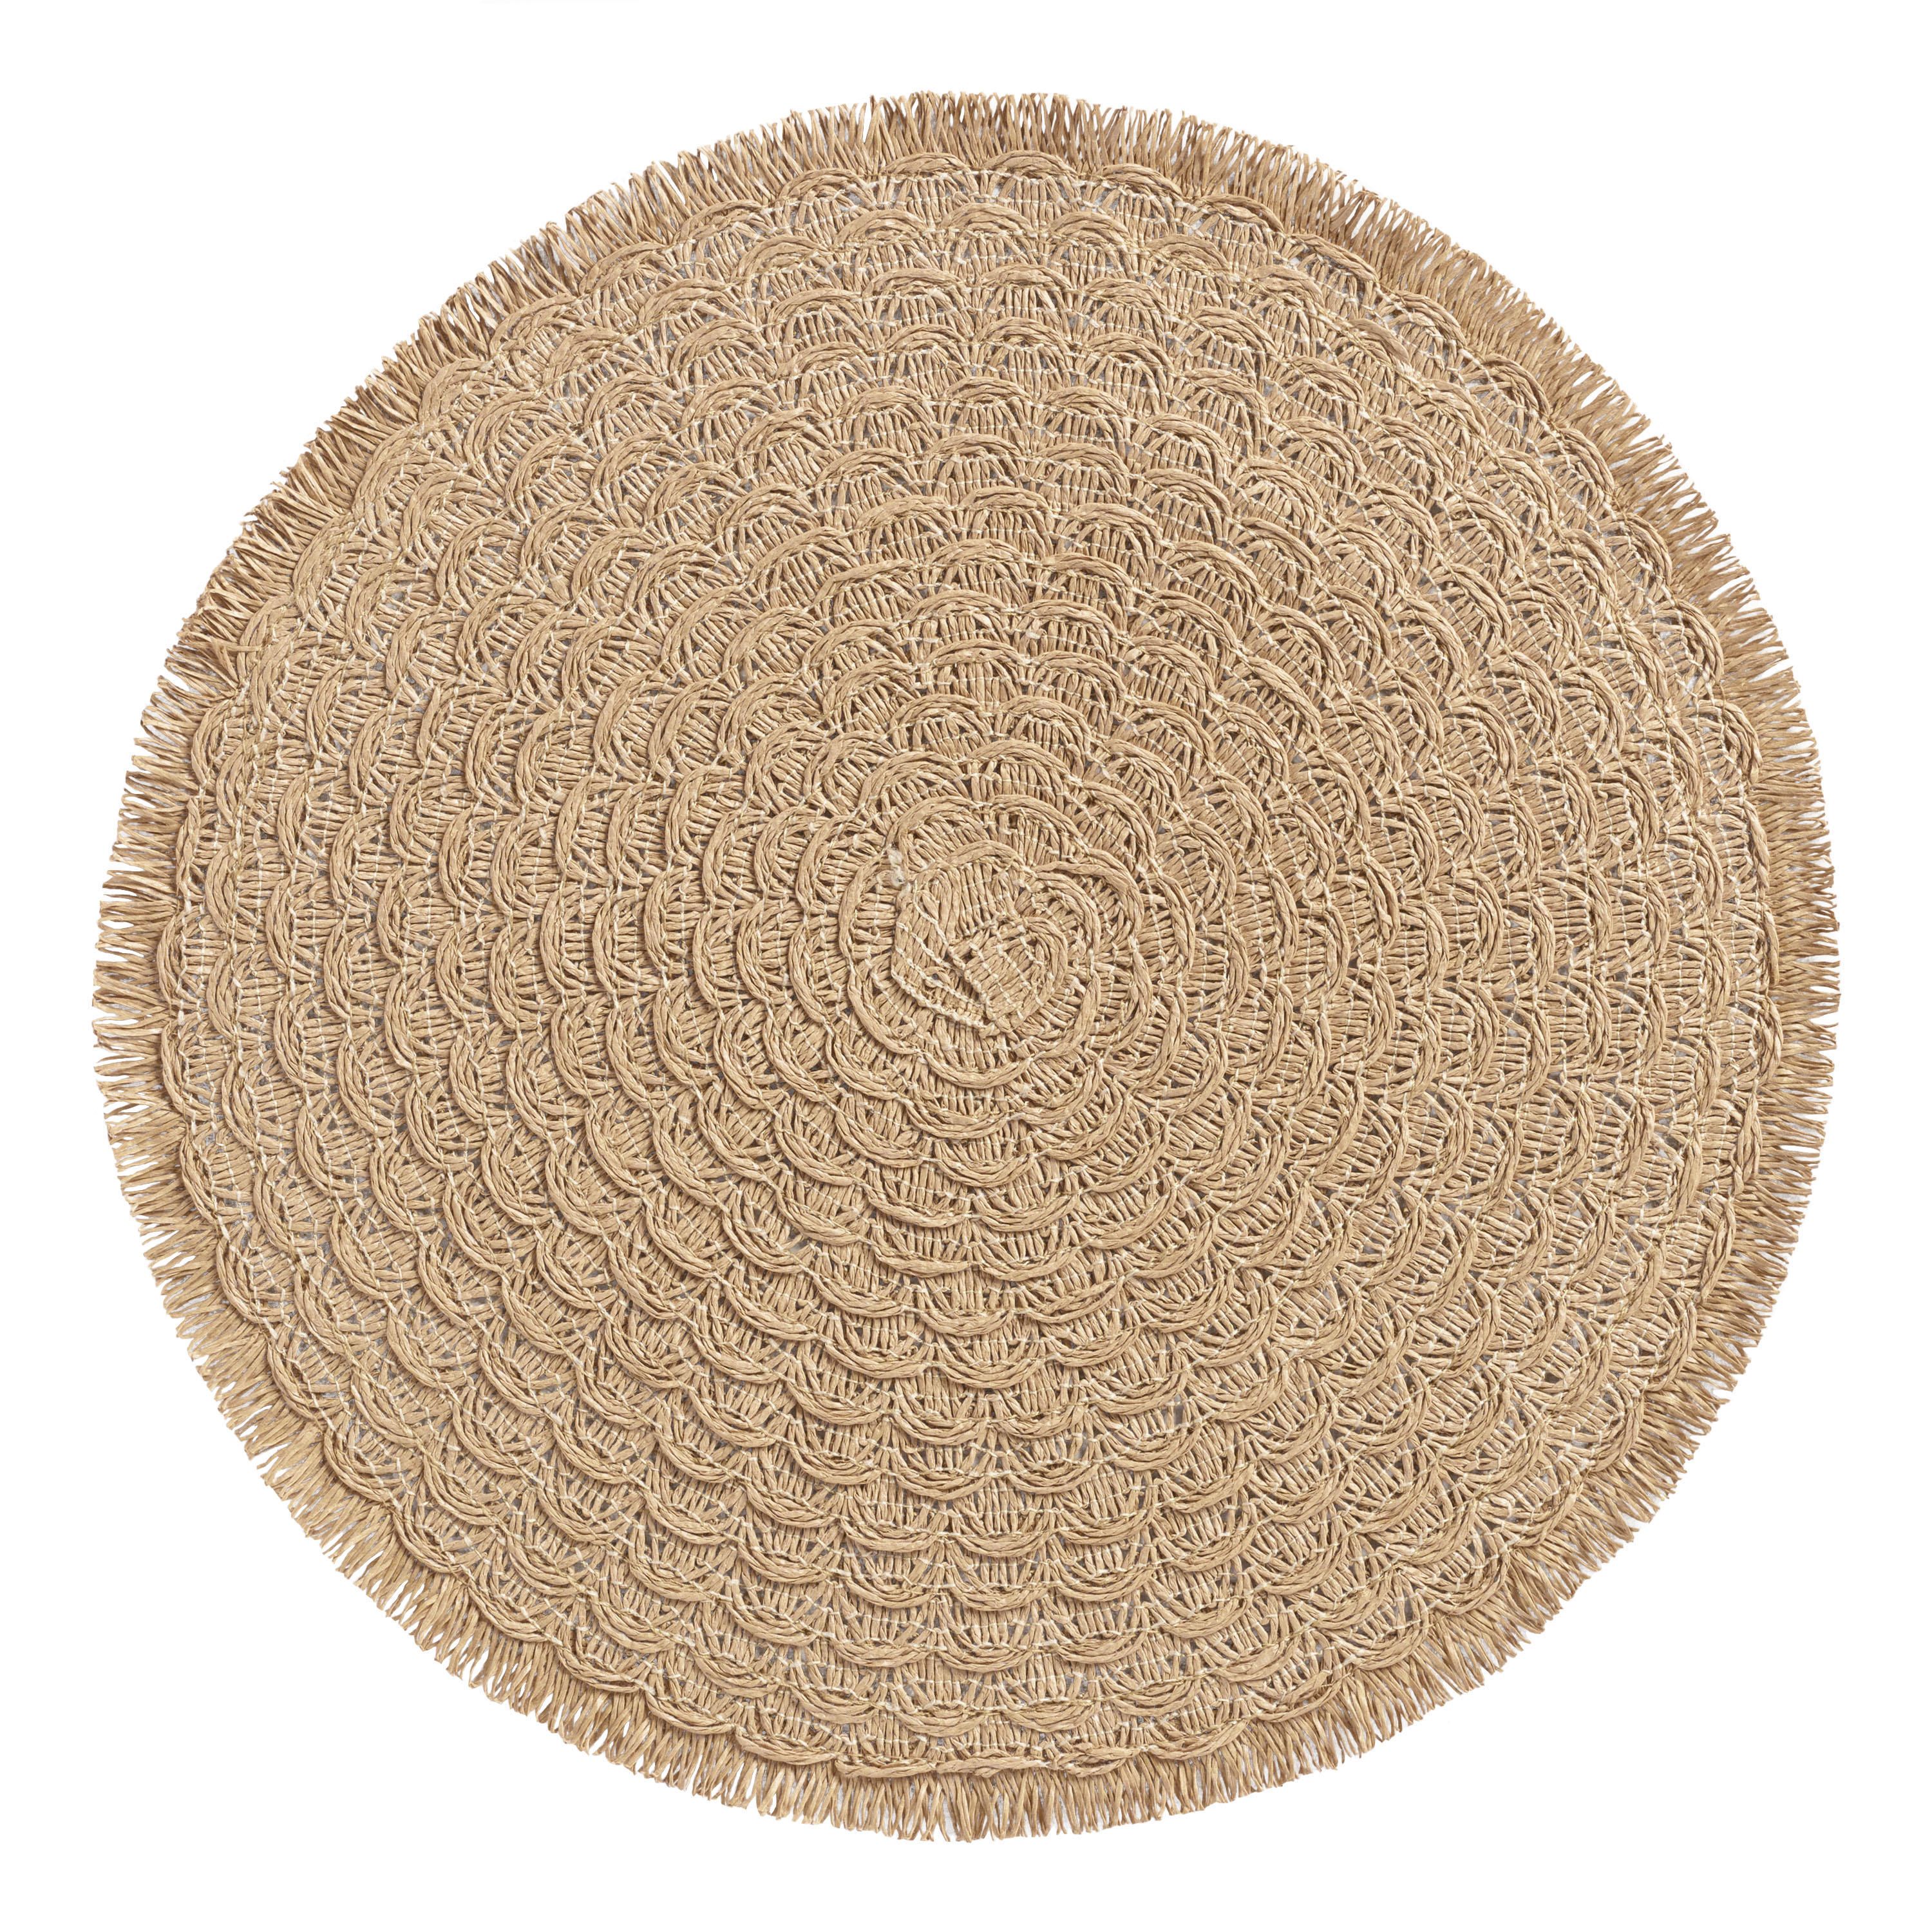 Round Natural Braided Placemat With Fringe Set Of 4 | World Market